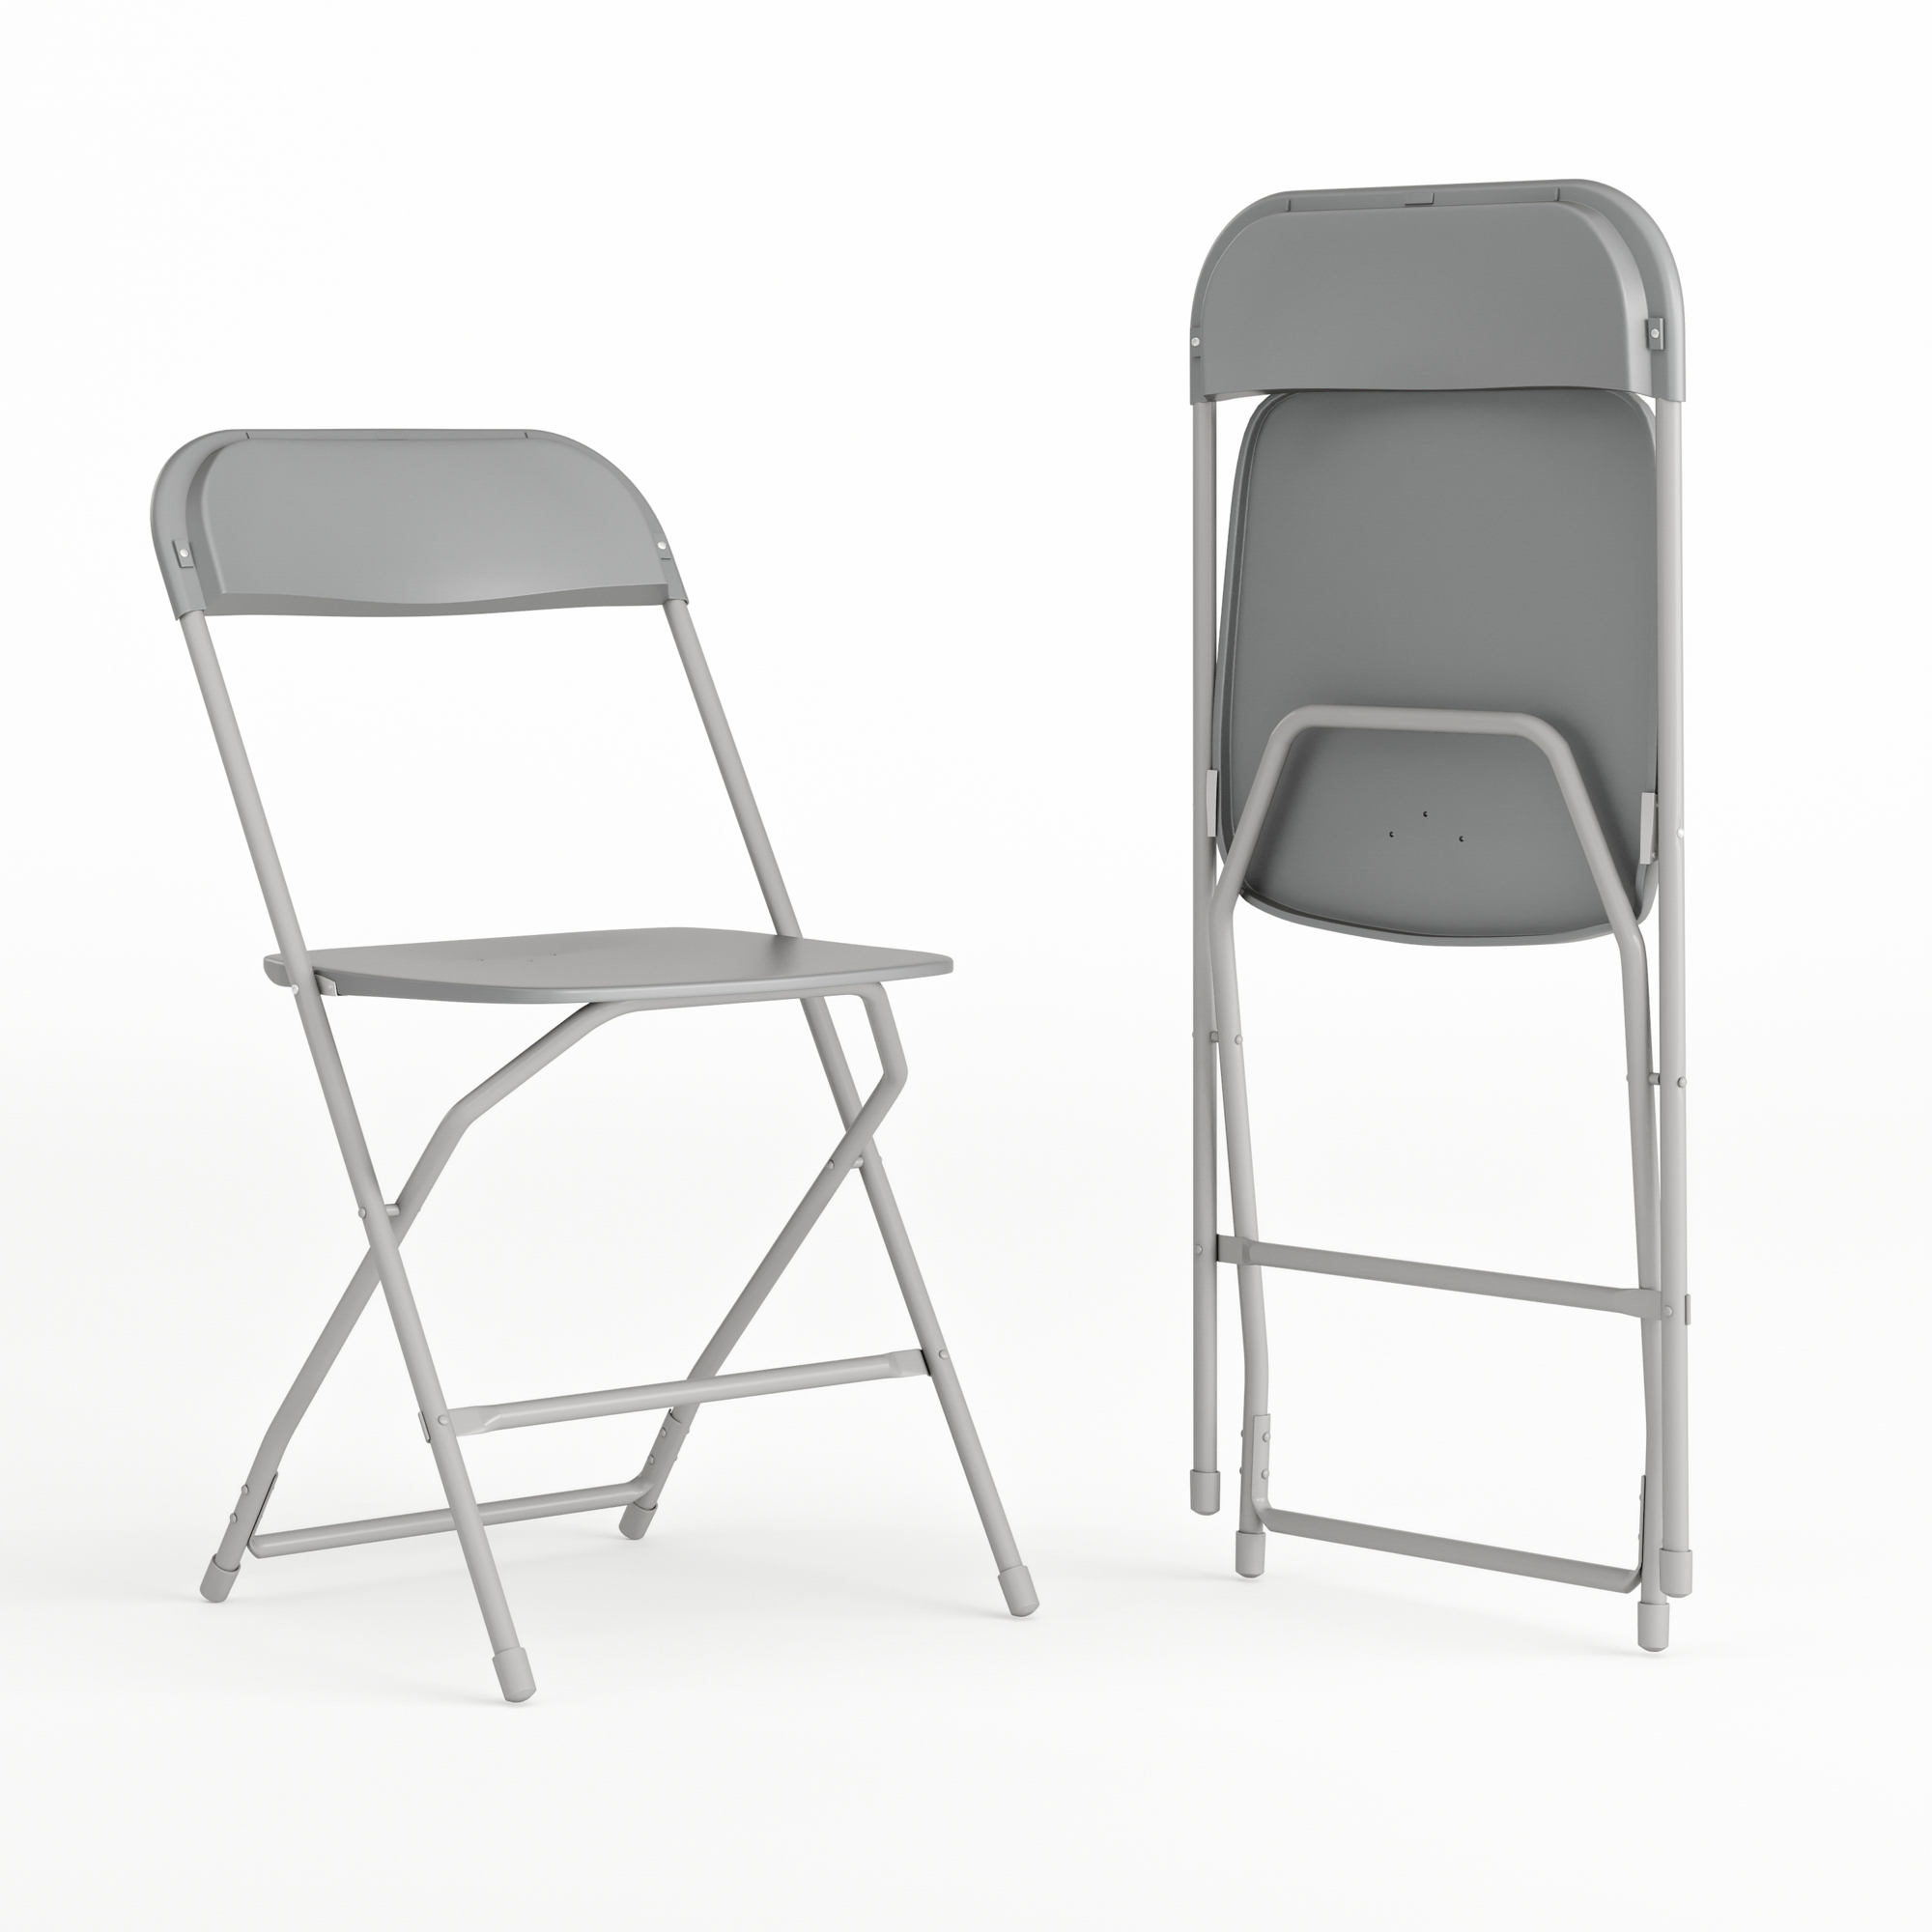 Flash Furniture, Folding Chair - Grey Plastic - 2 Pack, Primary Color Gray, Included (qty.) 2, Model 2LEL3GREY